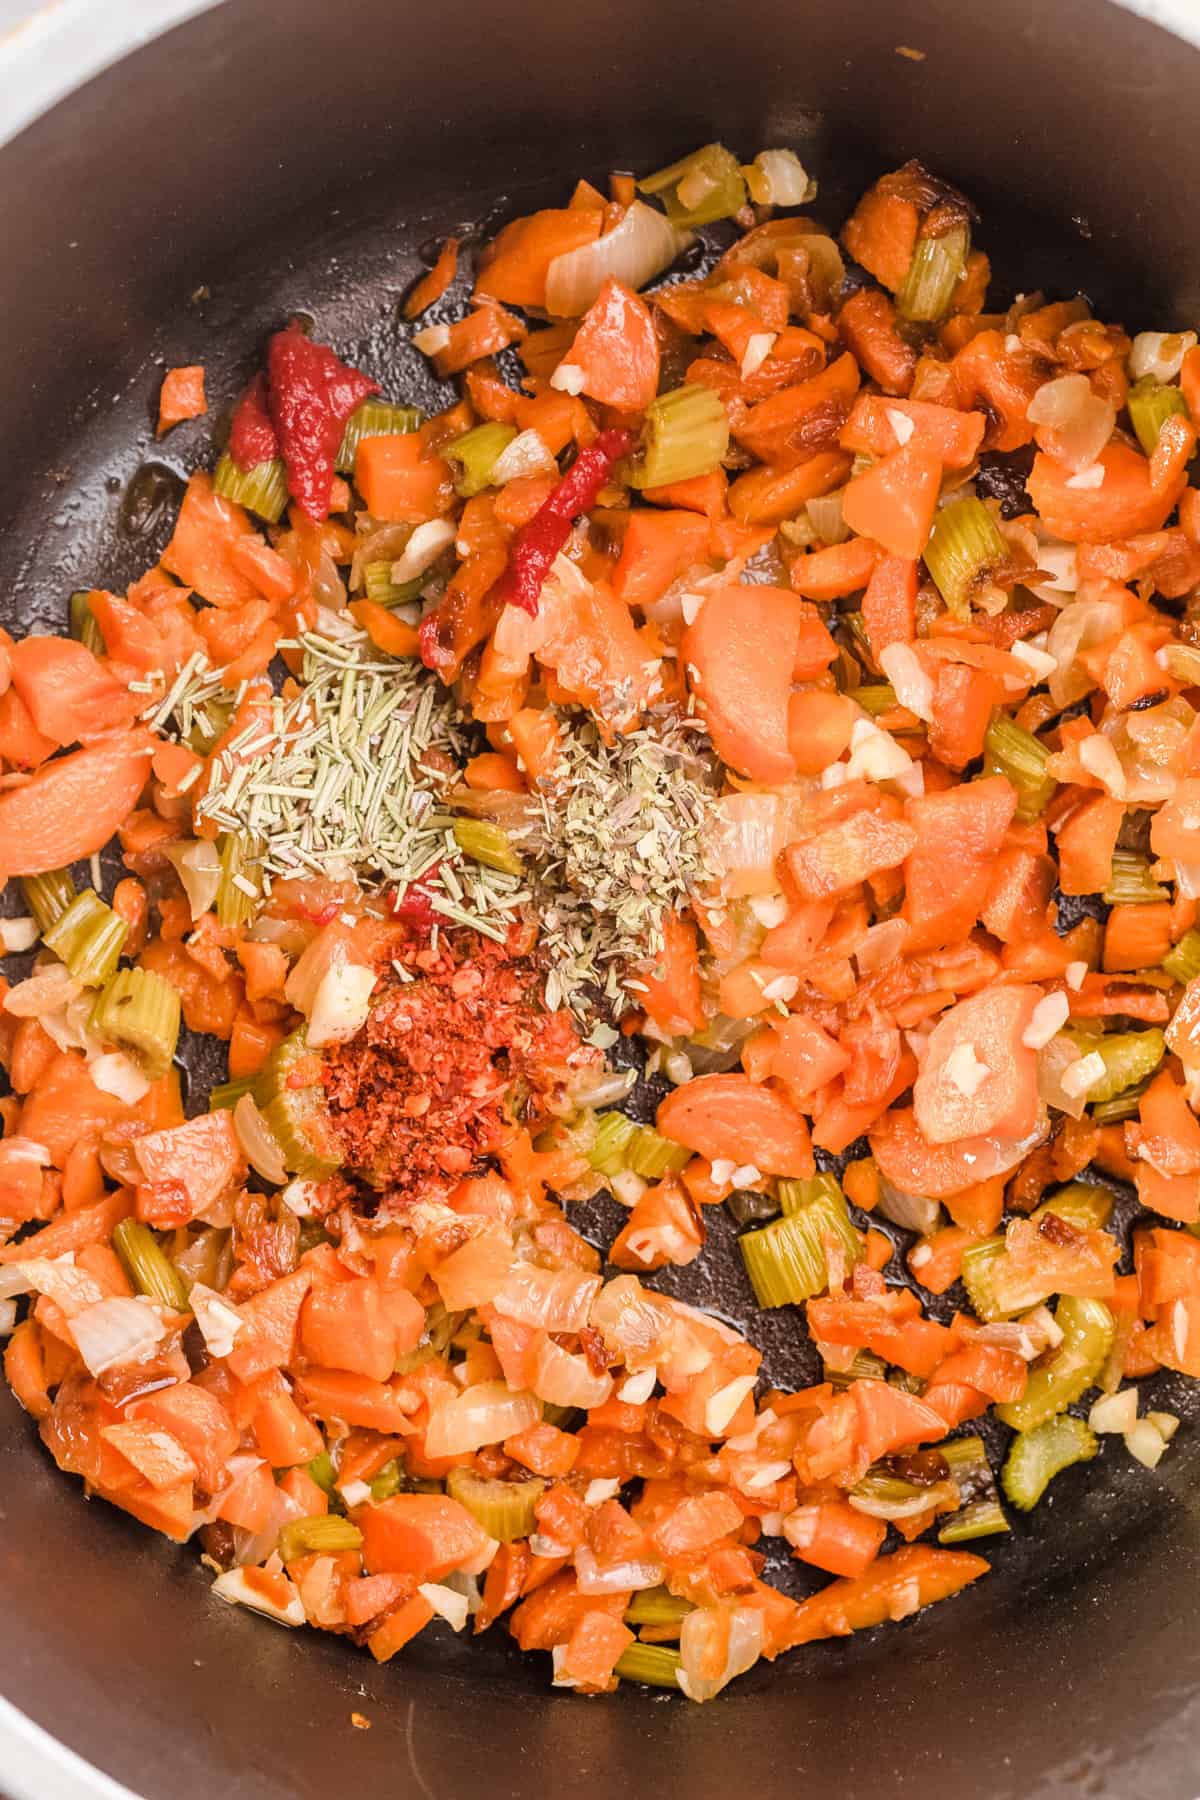 Overhead shot of spices added to mirepoix.